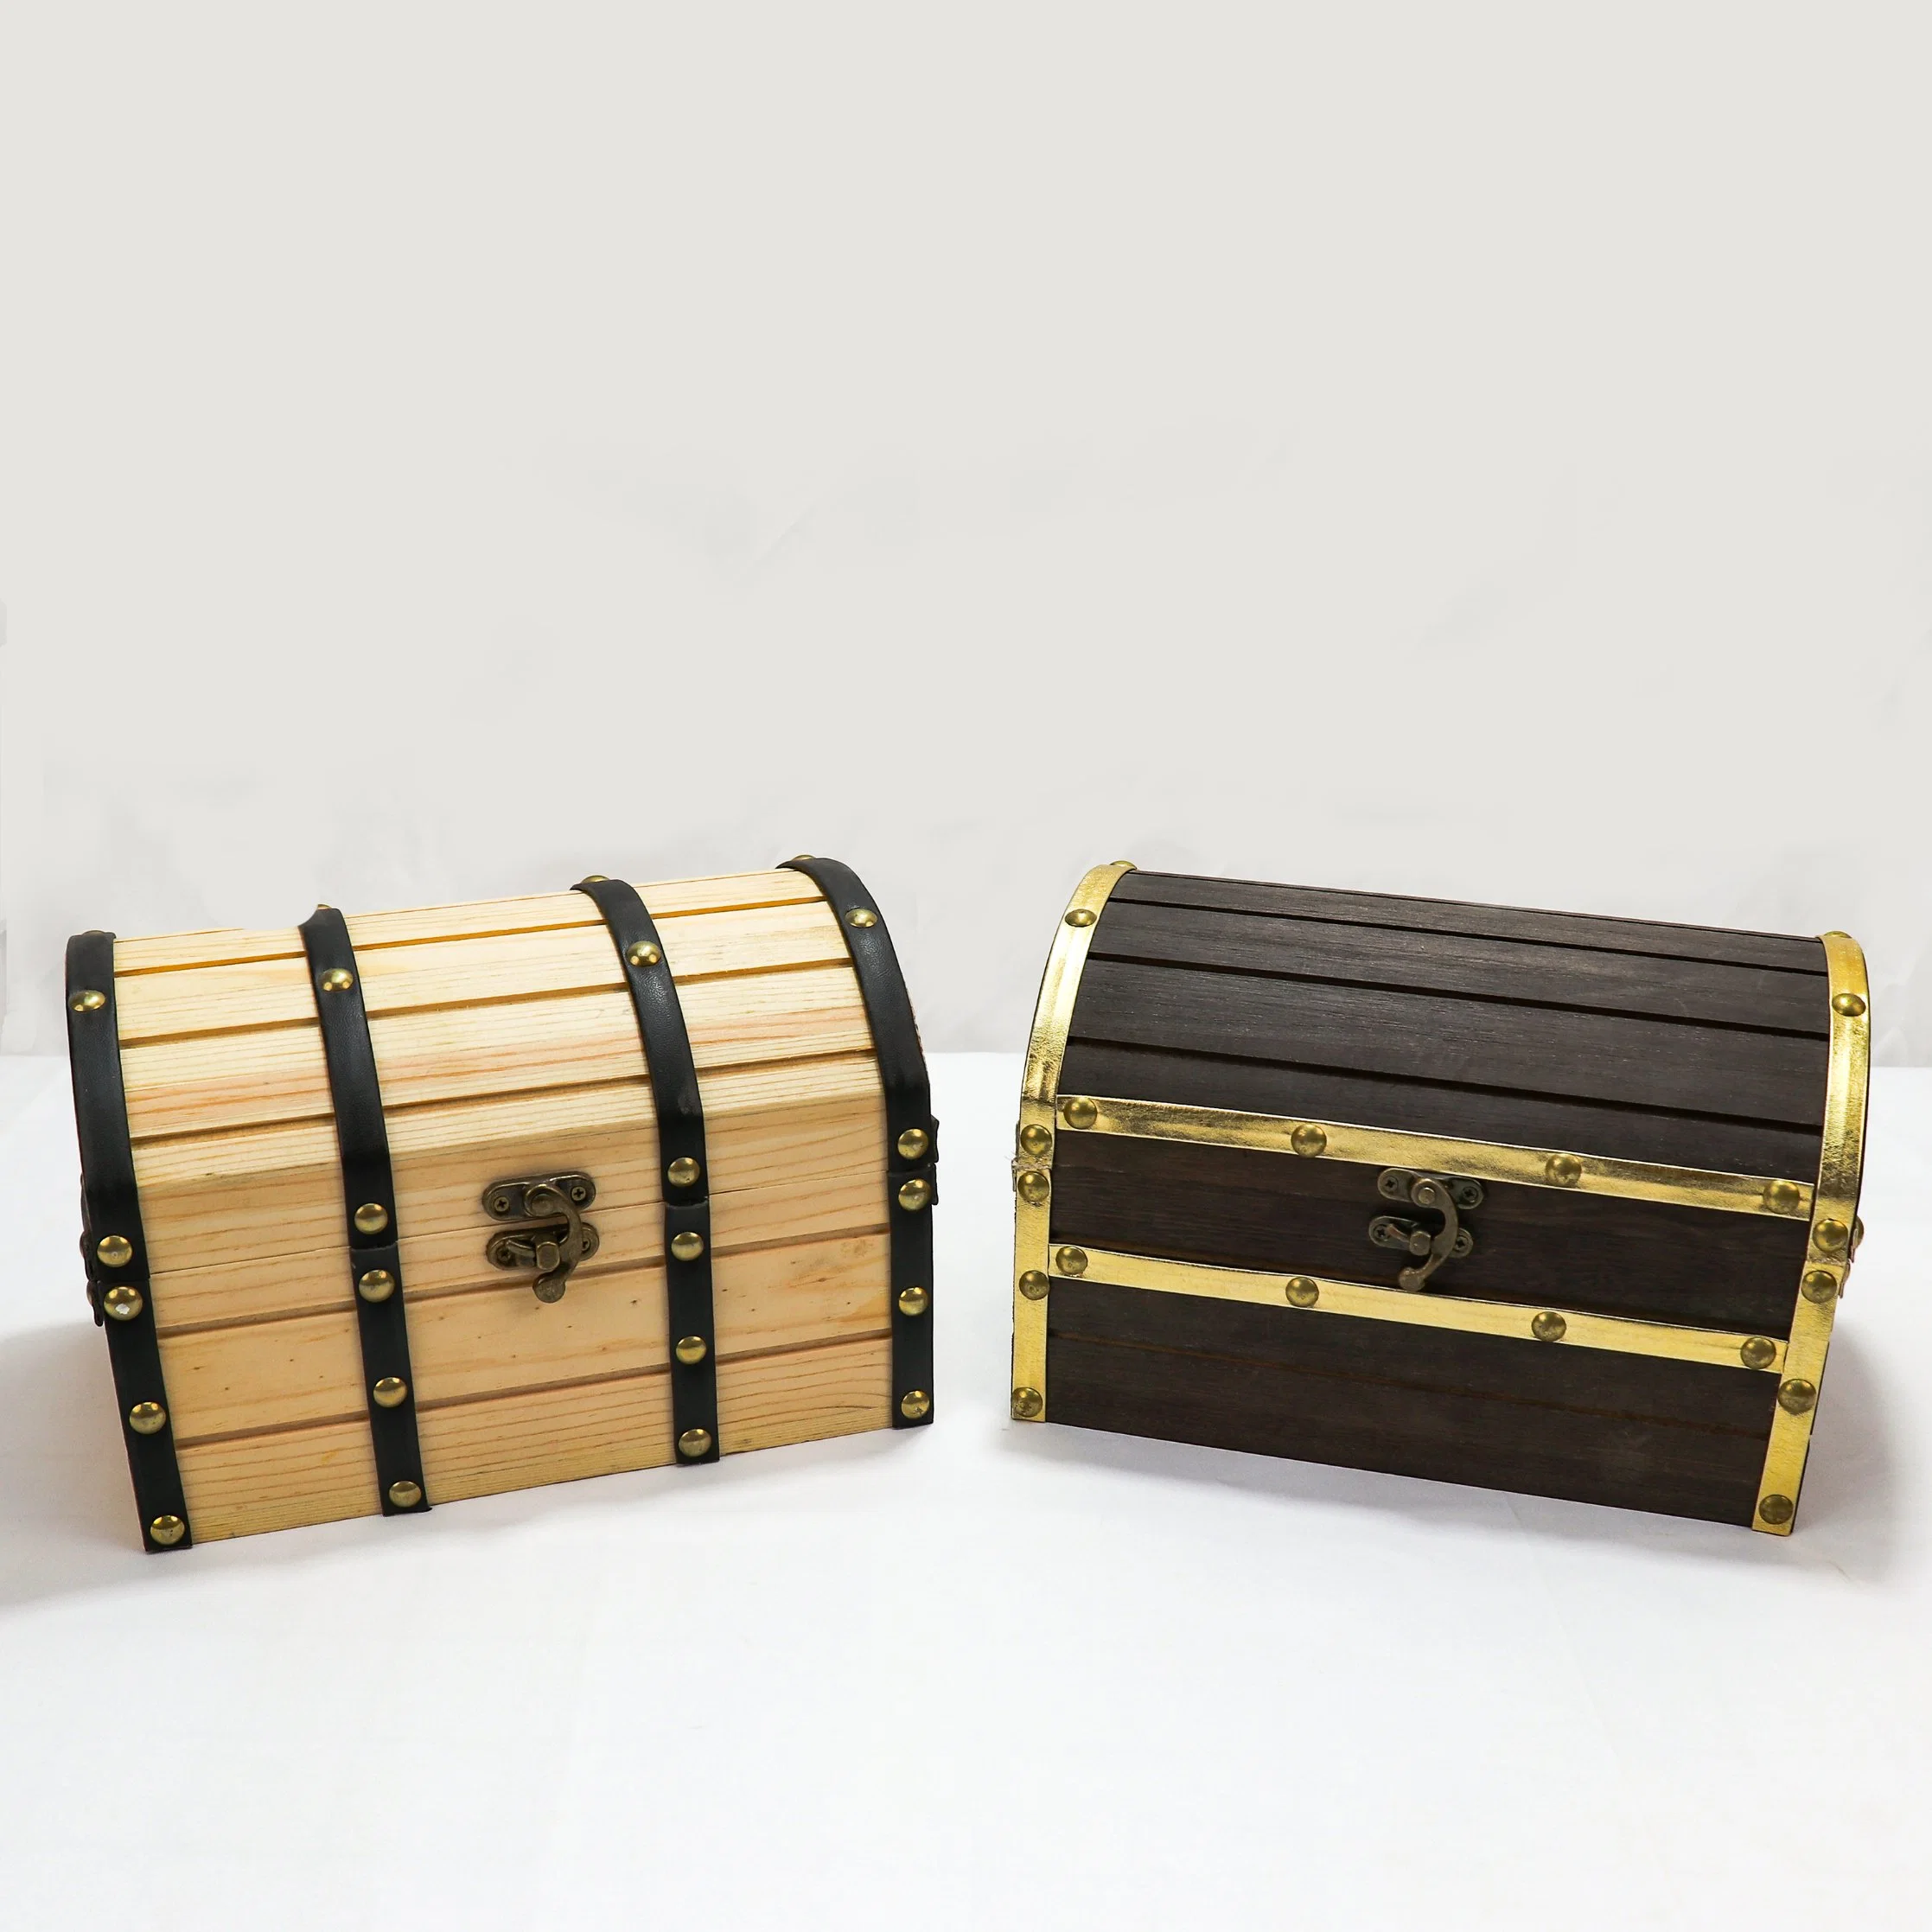 Wood and Leather Treasure Chest Wooden Box Jewelry Box with Latch